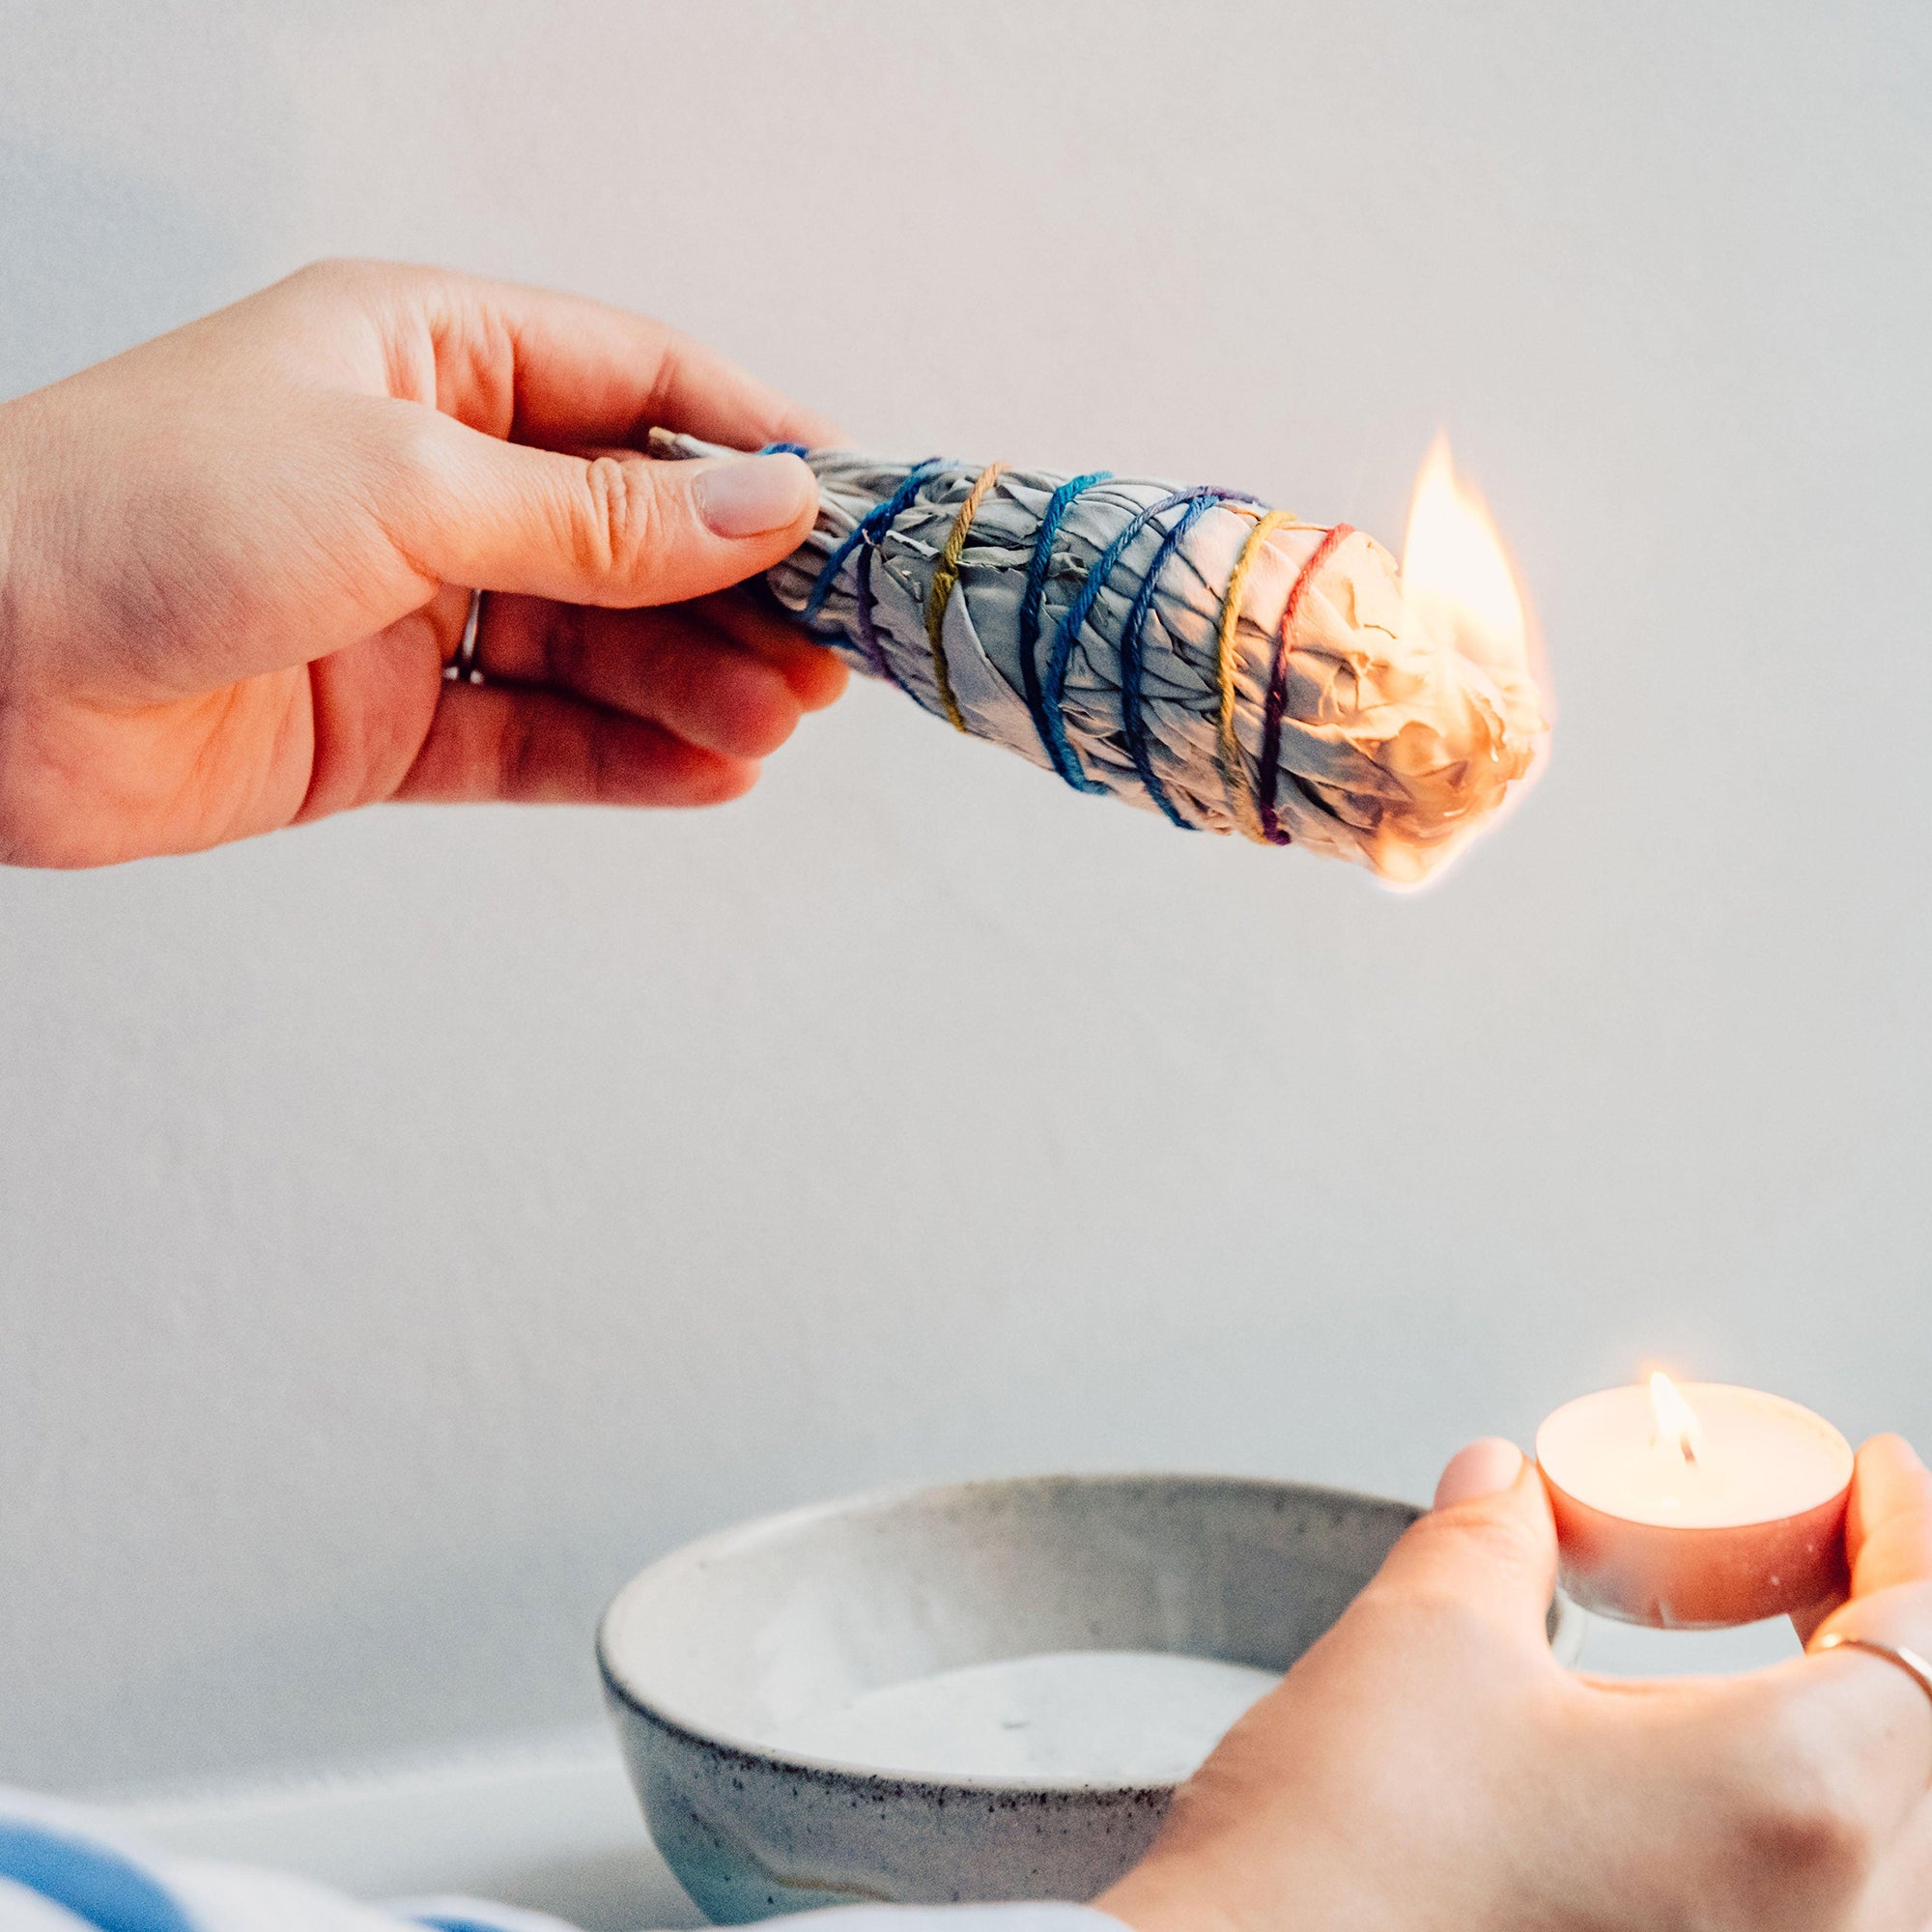 Left: Holding white sage smudge stick, Right: holding mini candle to lit the sage smudge stick.